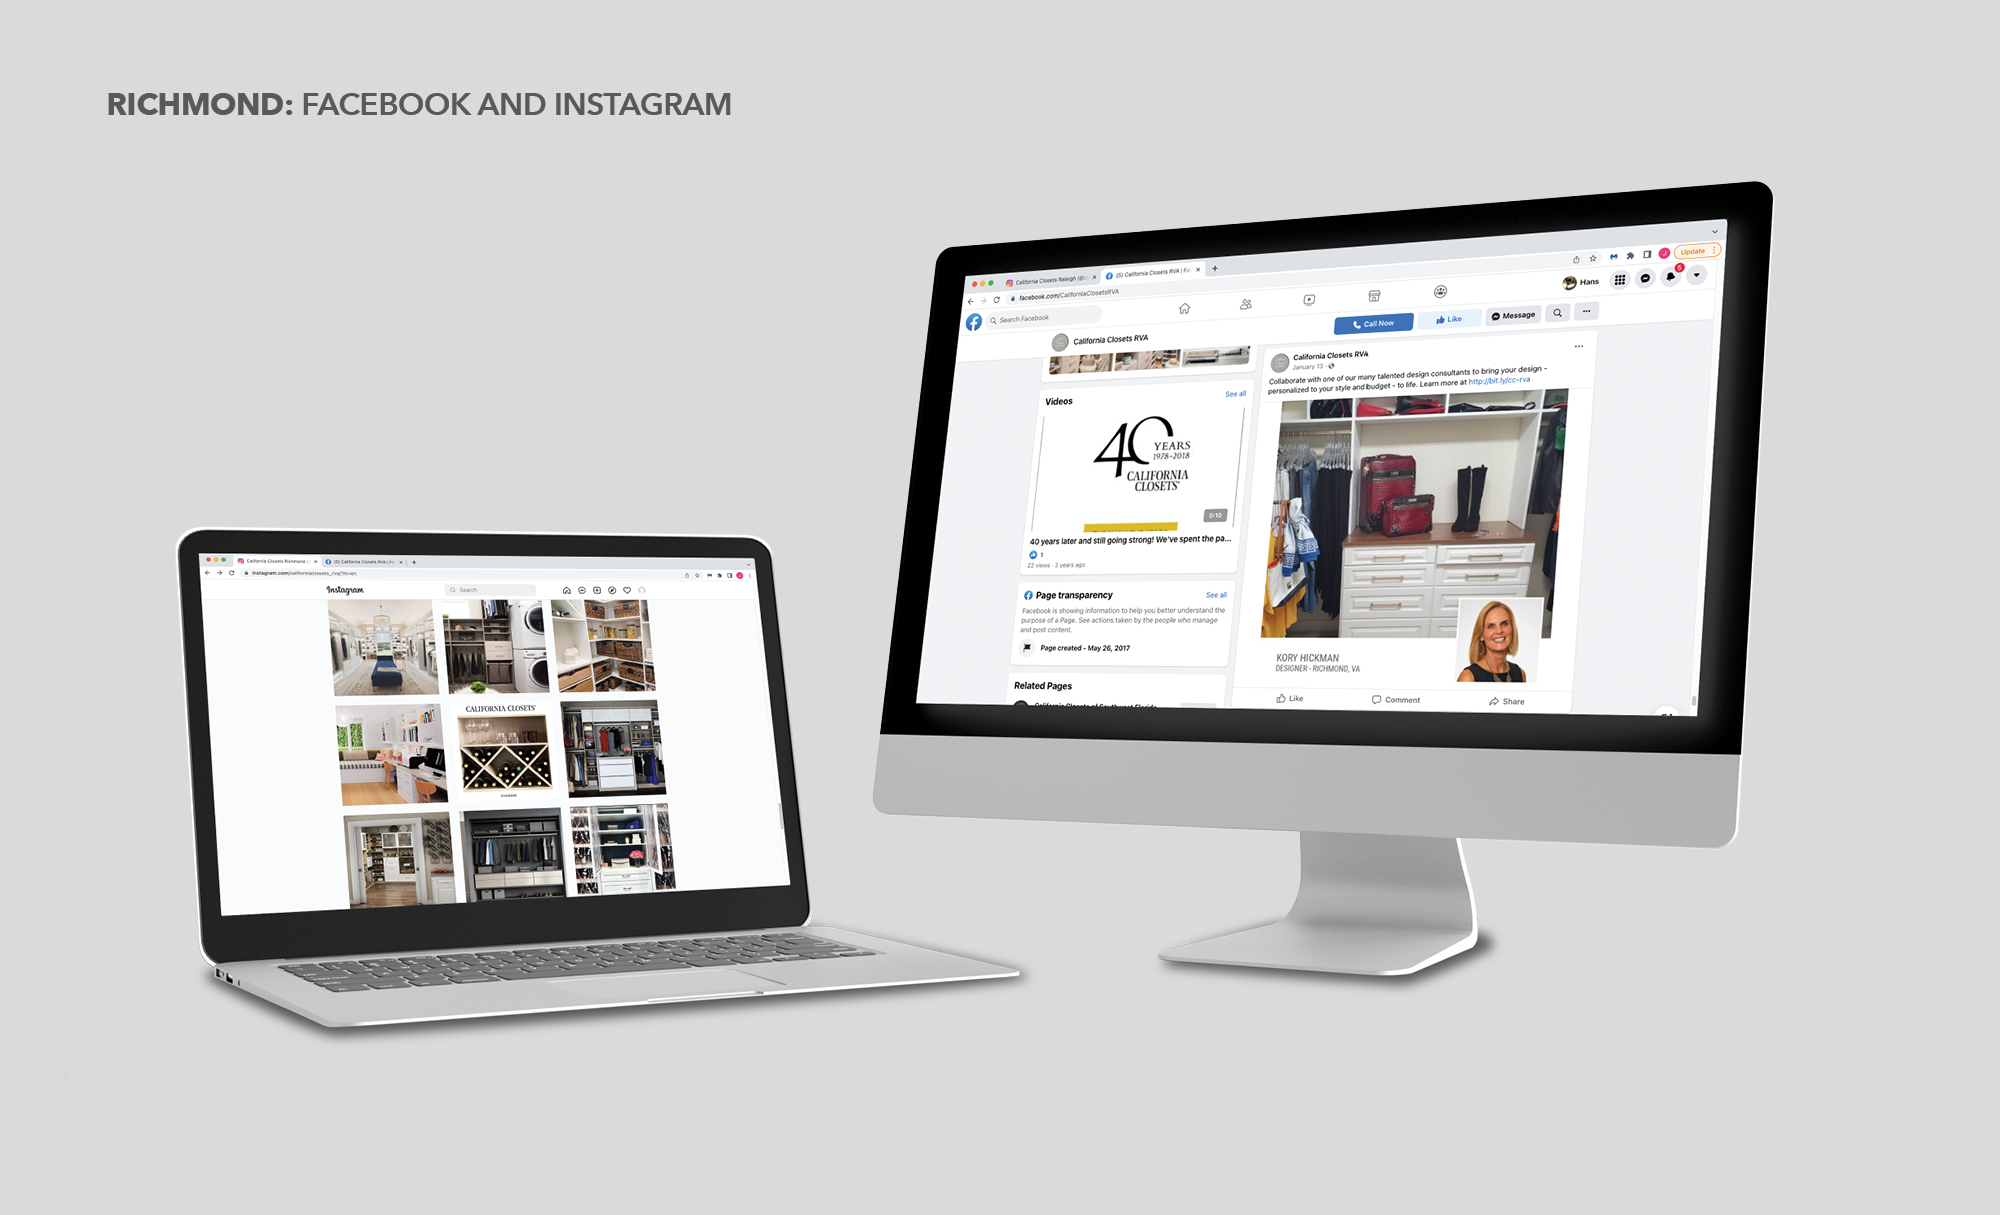 Display of Facebook and Instagram posts for California Closets in Richmond Virginia